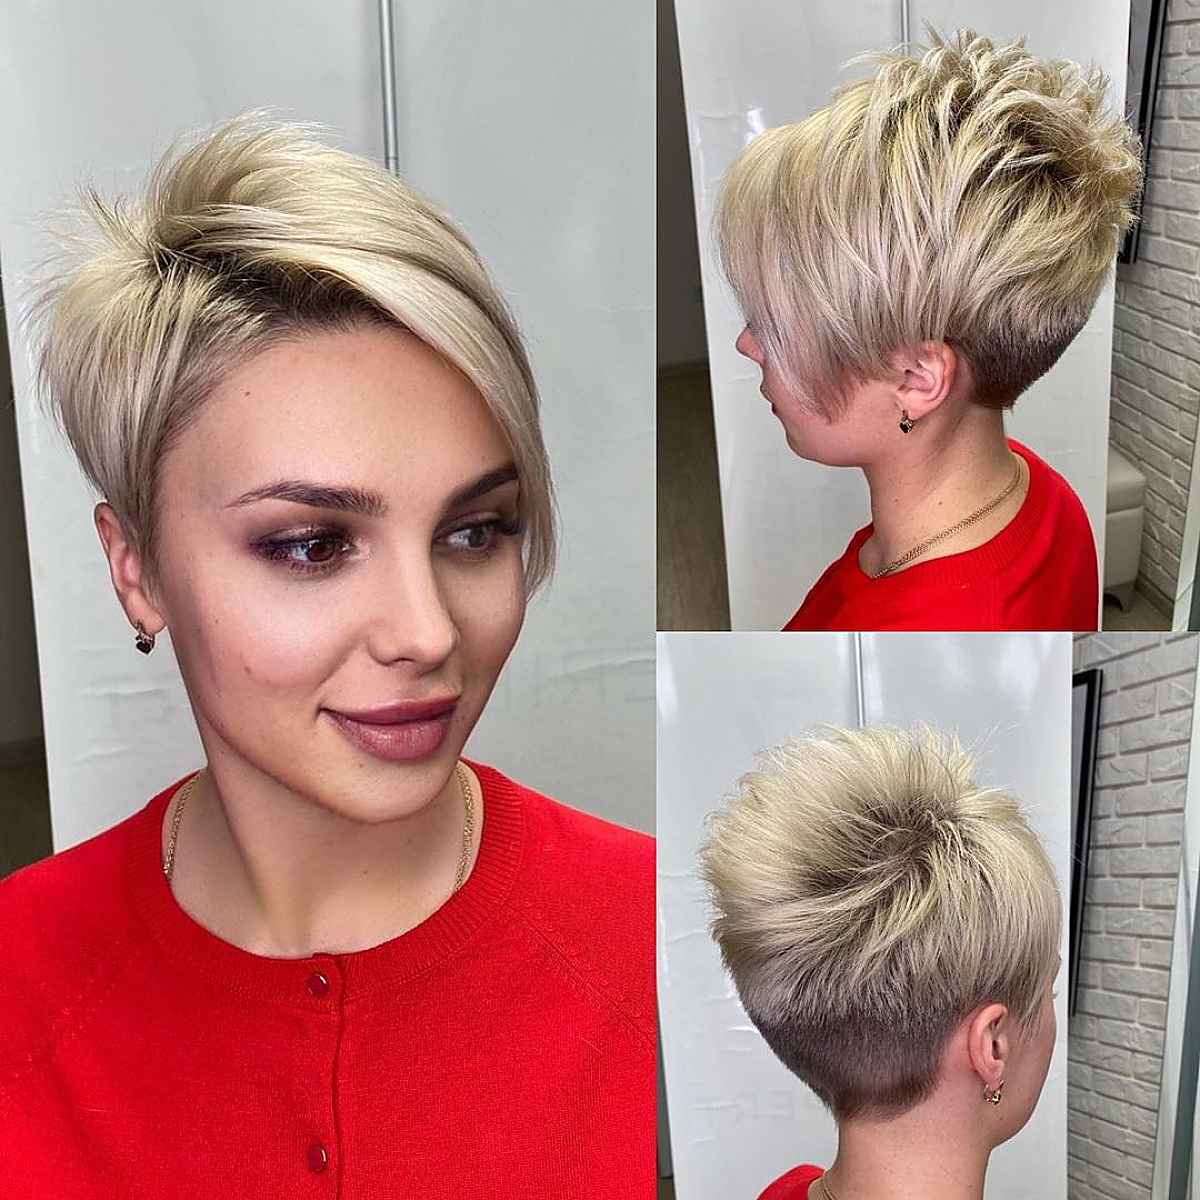 15 Spiky Pixie Cuts for a Bold, Yet Super Cute Look